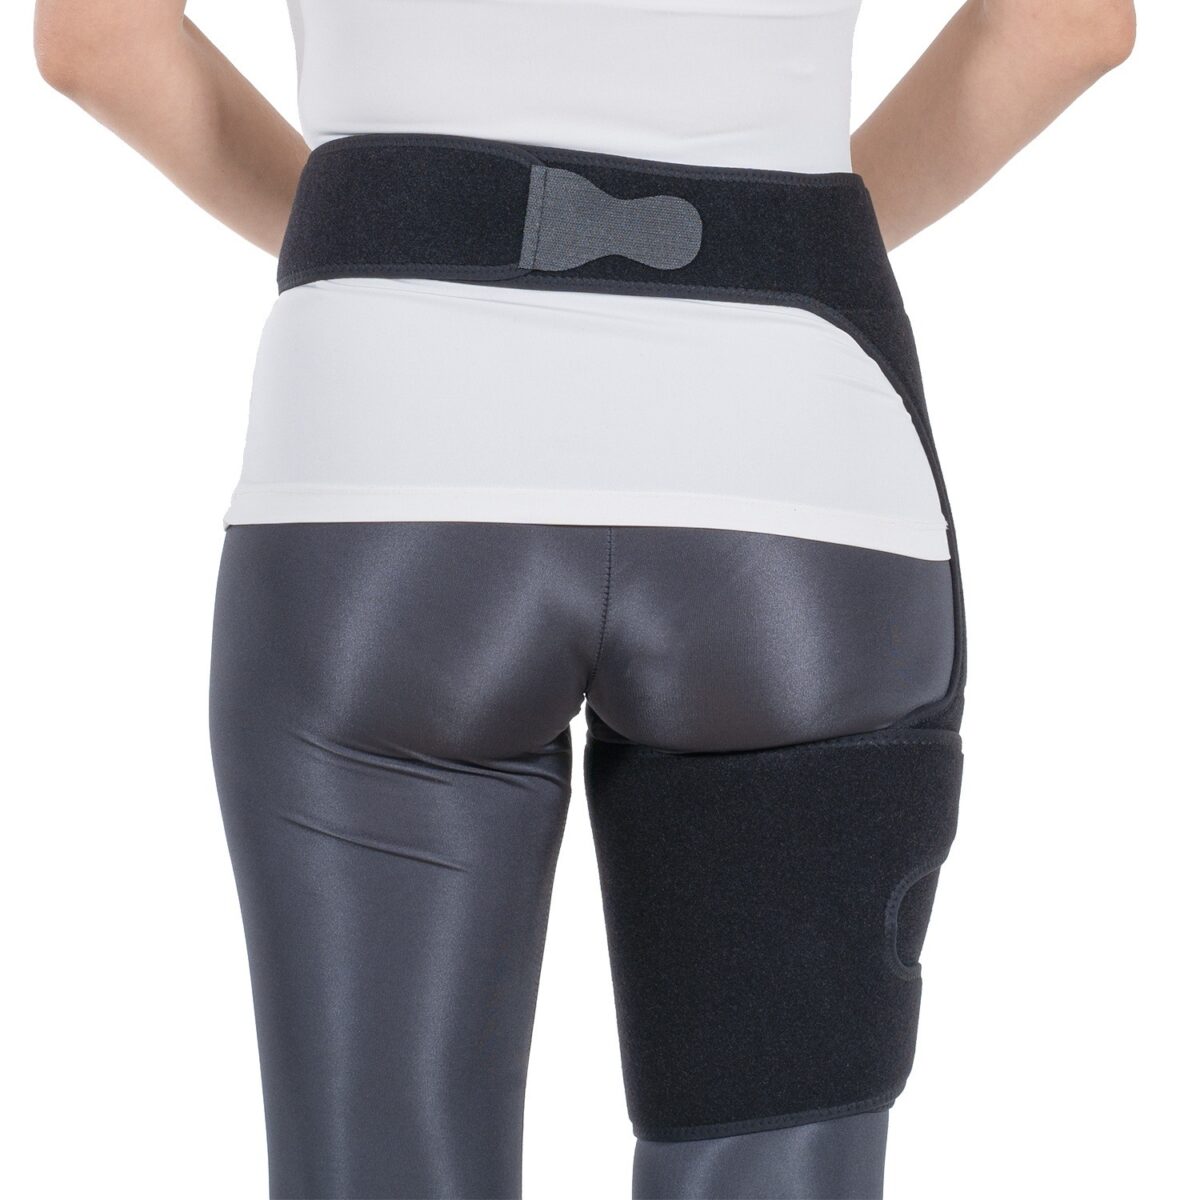 wingmed orthopedic equipments W530 thigh support with belt 29